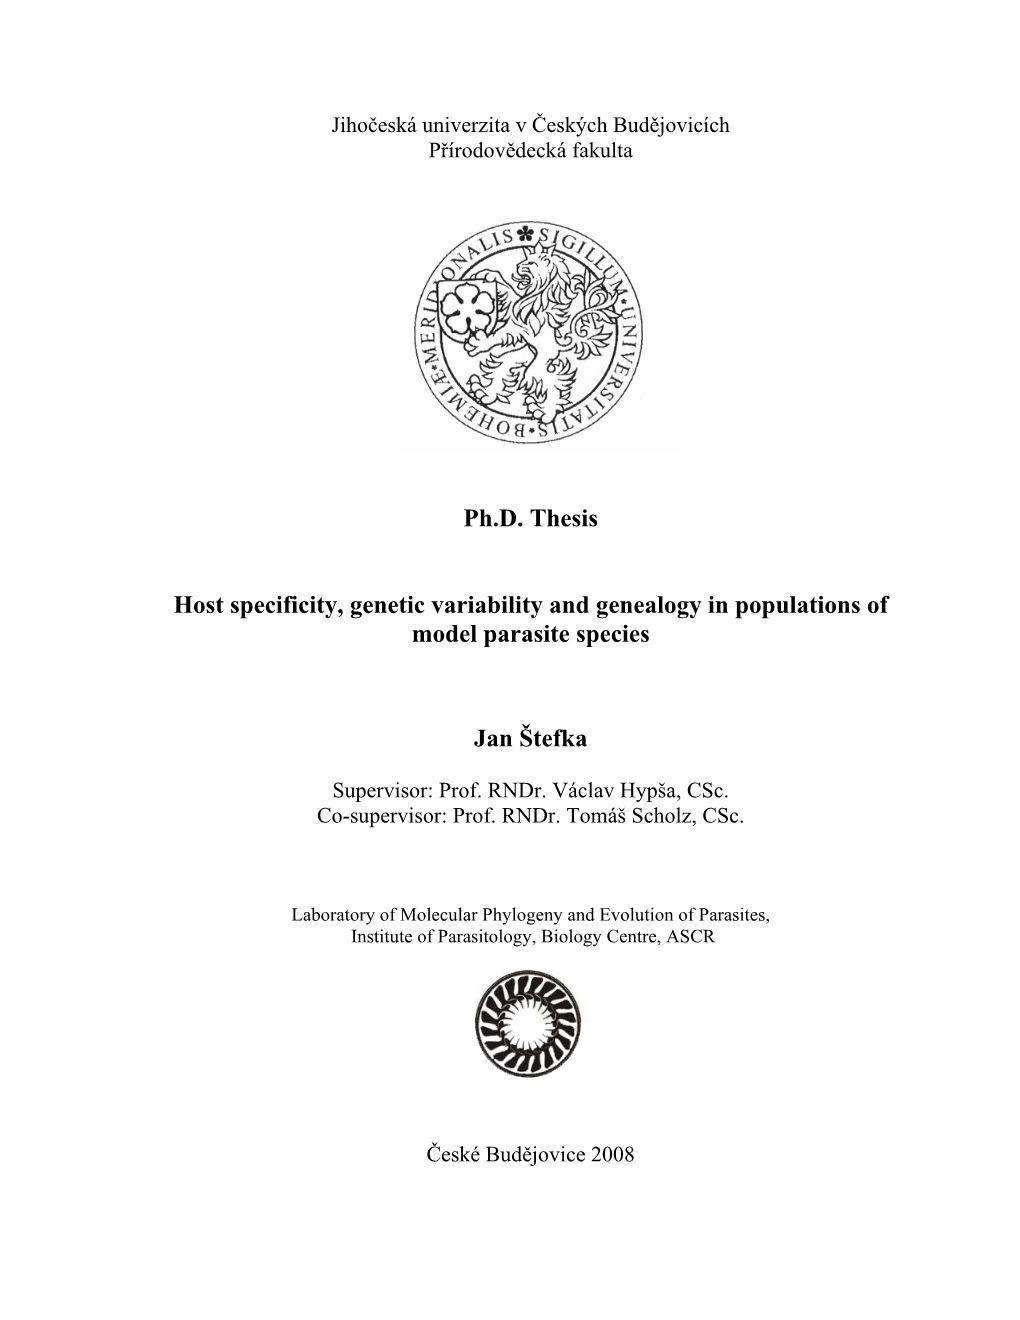 Ph.D. Thesis Host Specificity, Genetic Variability and Genealogy In